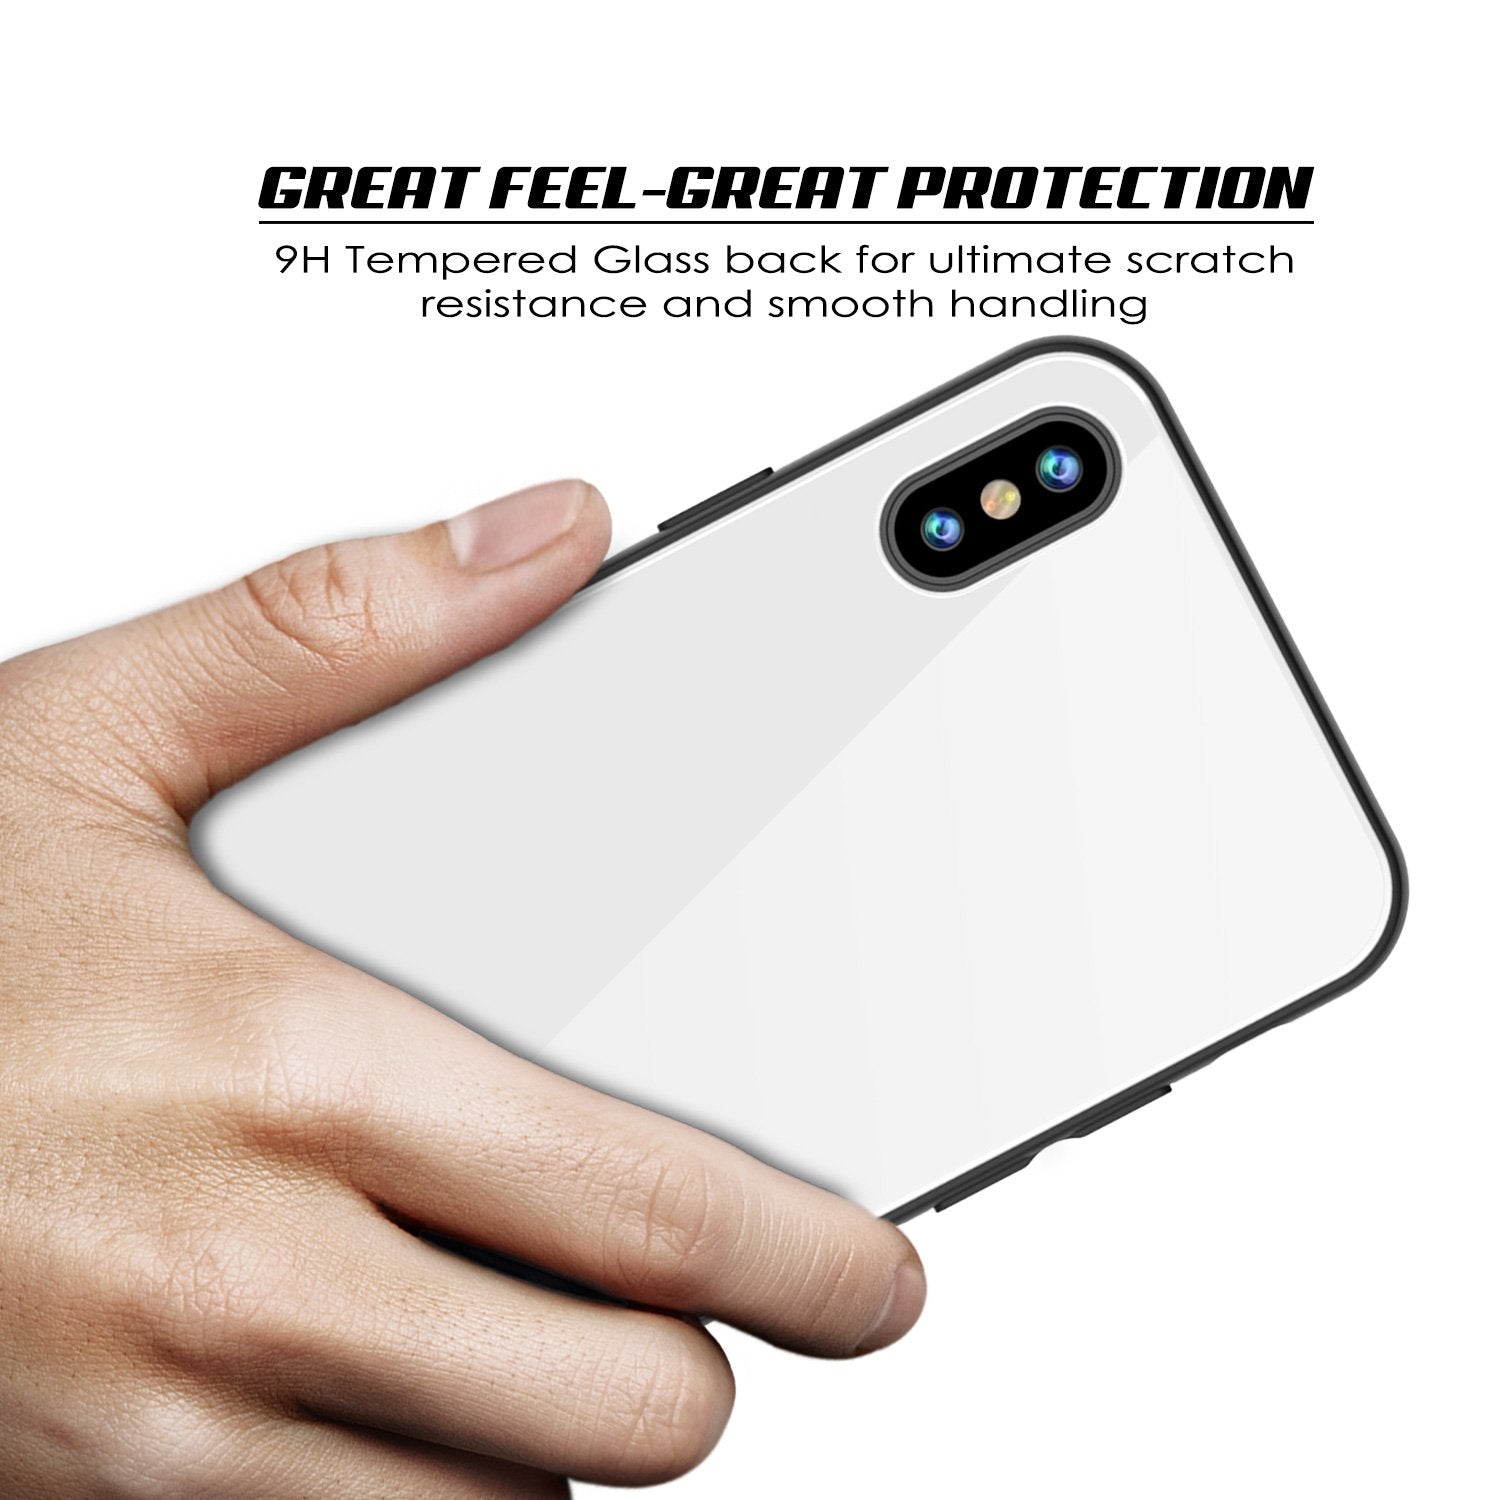 iPhone X Case, Punkcase GlassShield Ultra Thin Protectiv Cover, WHITE